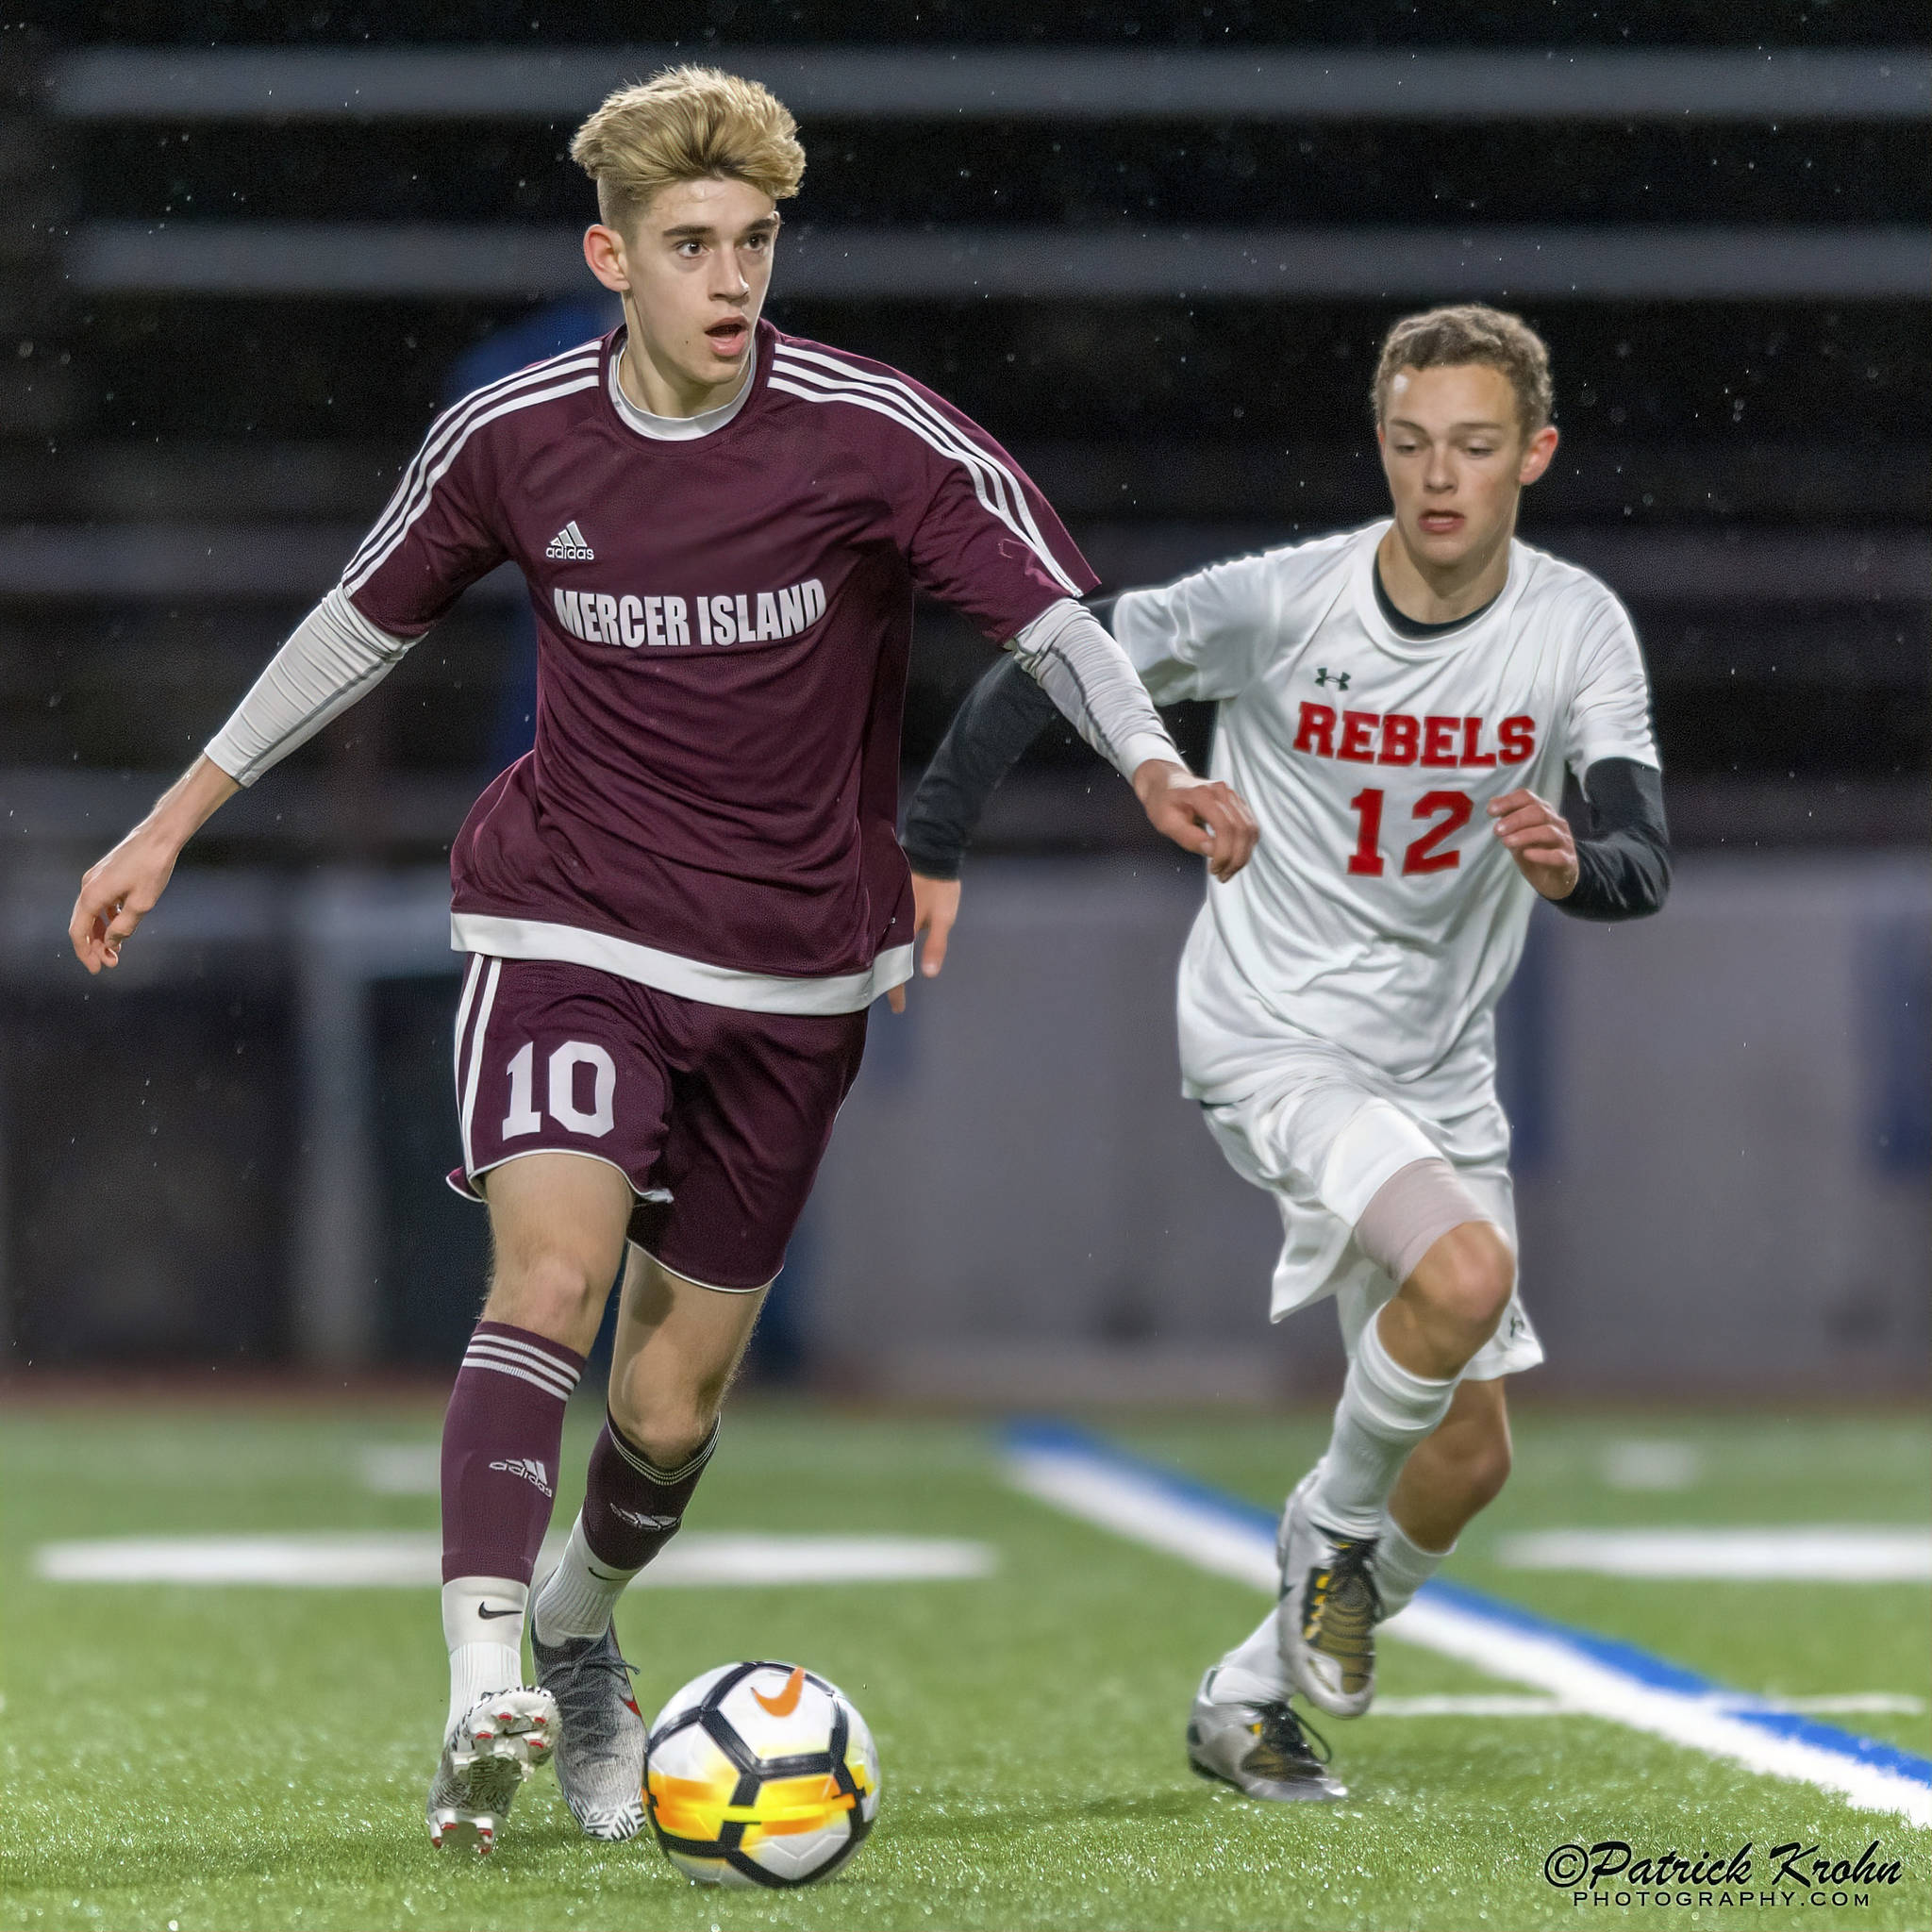 Mercer Island senior Matthew Capone, left, dribbles the ball up field while being guarded by Juanita sophomore Andrew Taylor in a game on April 11. Juanita defeated Mercer Island, 2-1, in a loser-out, 3A KingCo playoff game on May 7 at Mercer Island High School. Photo courtesy of Patrick Krohn/Patrick Krohn Photography